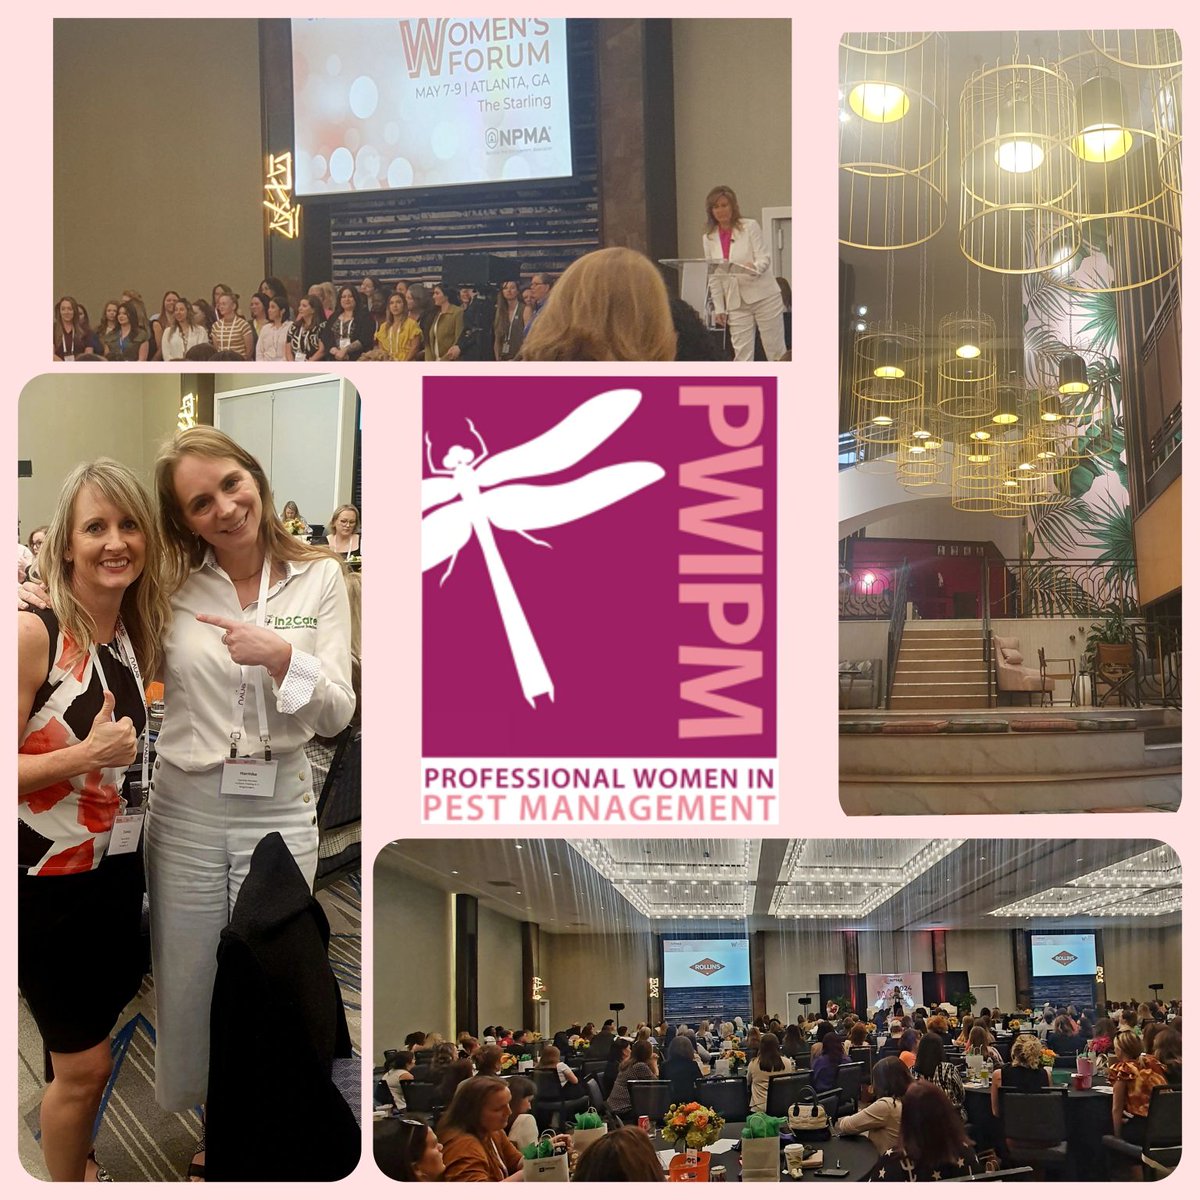 In2Care's Harmke Klunder joined 400 professionals at the #NPMAWomensForum last week. We thank the  #ProfessionalWomenInPestControl from @NationalPestMgt for hosting this fabulous event!  
#pwipm #npma #equality #inclusion #in2care #empoweredwomen #pmp #pestmanagement